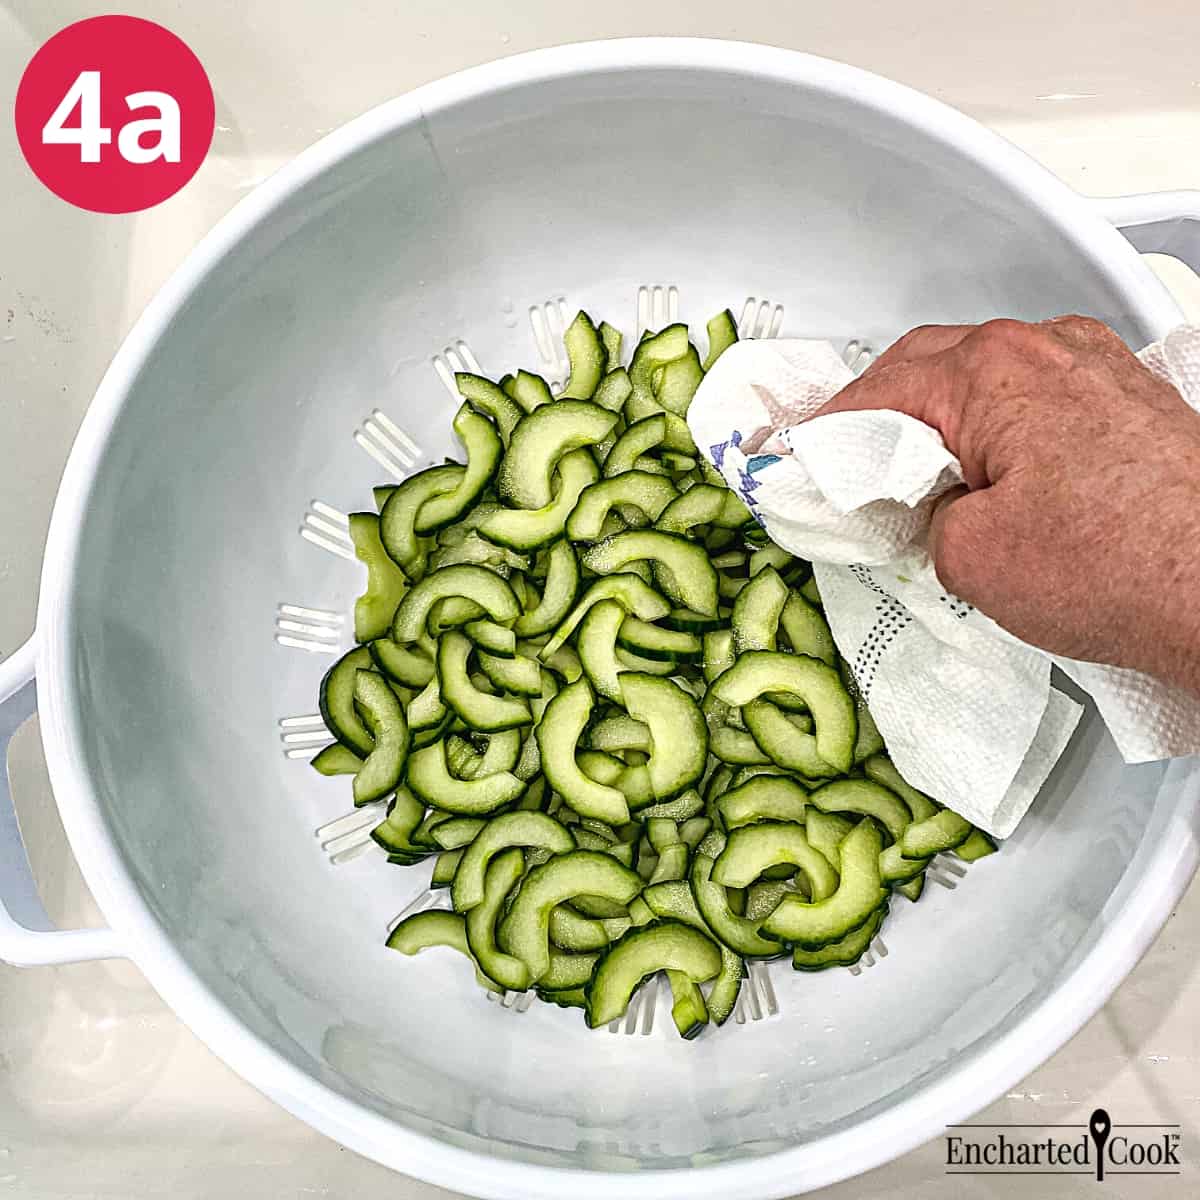 Process Photo 4a - The brined slices of cucumber are drained an blotted in a large white colander.